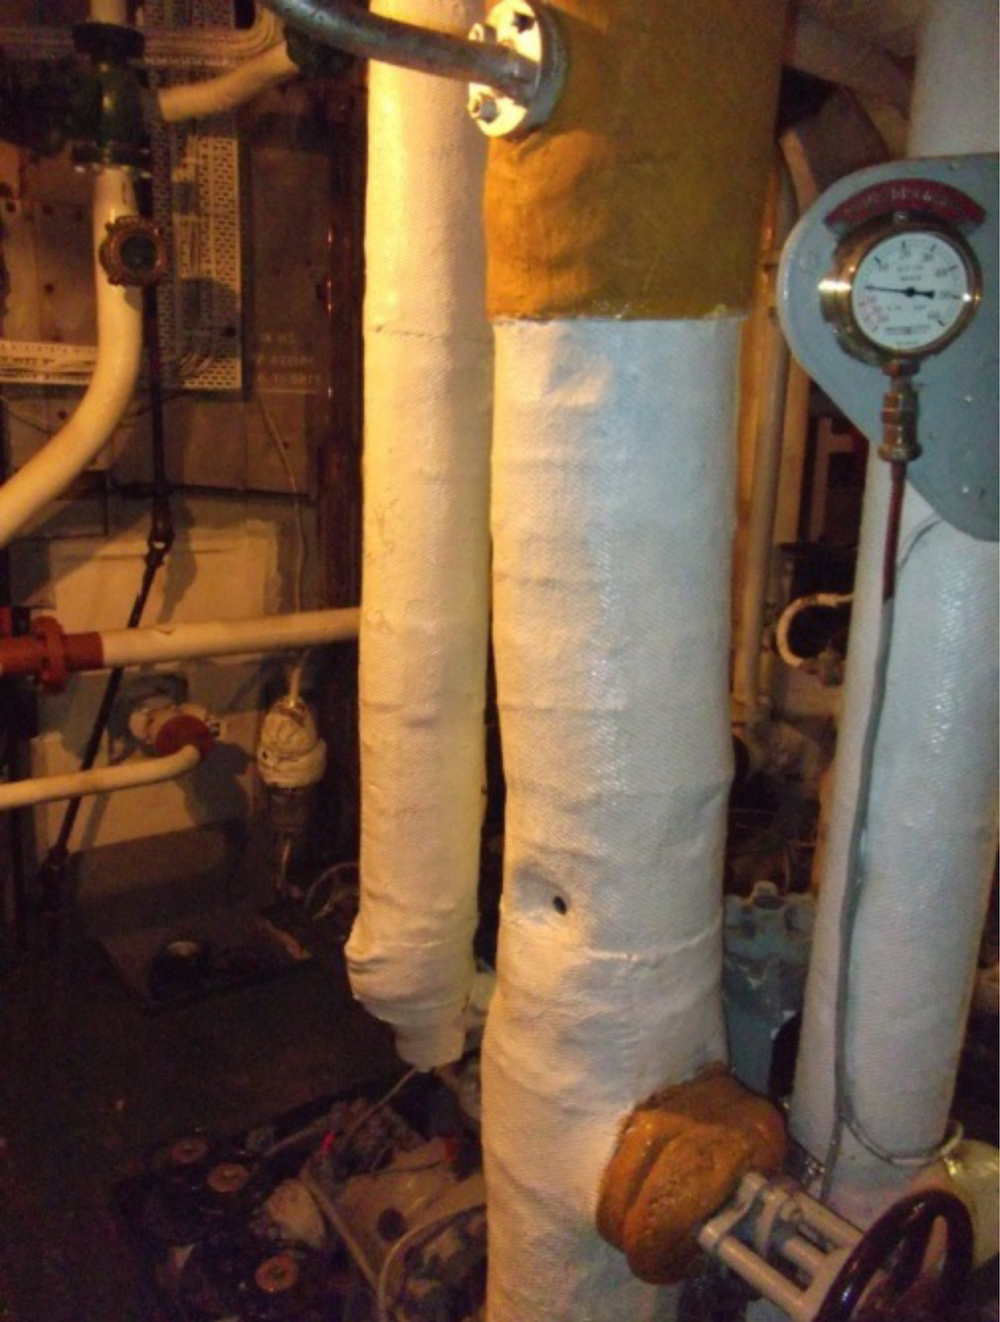 Asbestos insulation around pipework and boilers